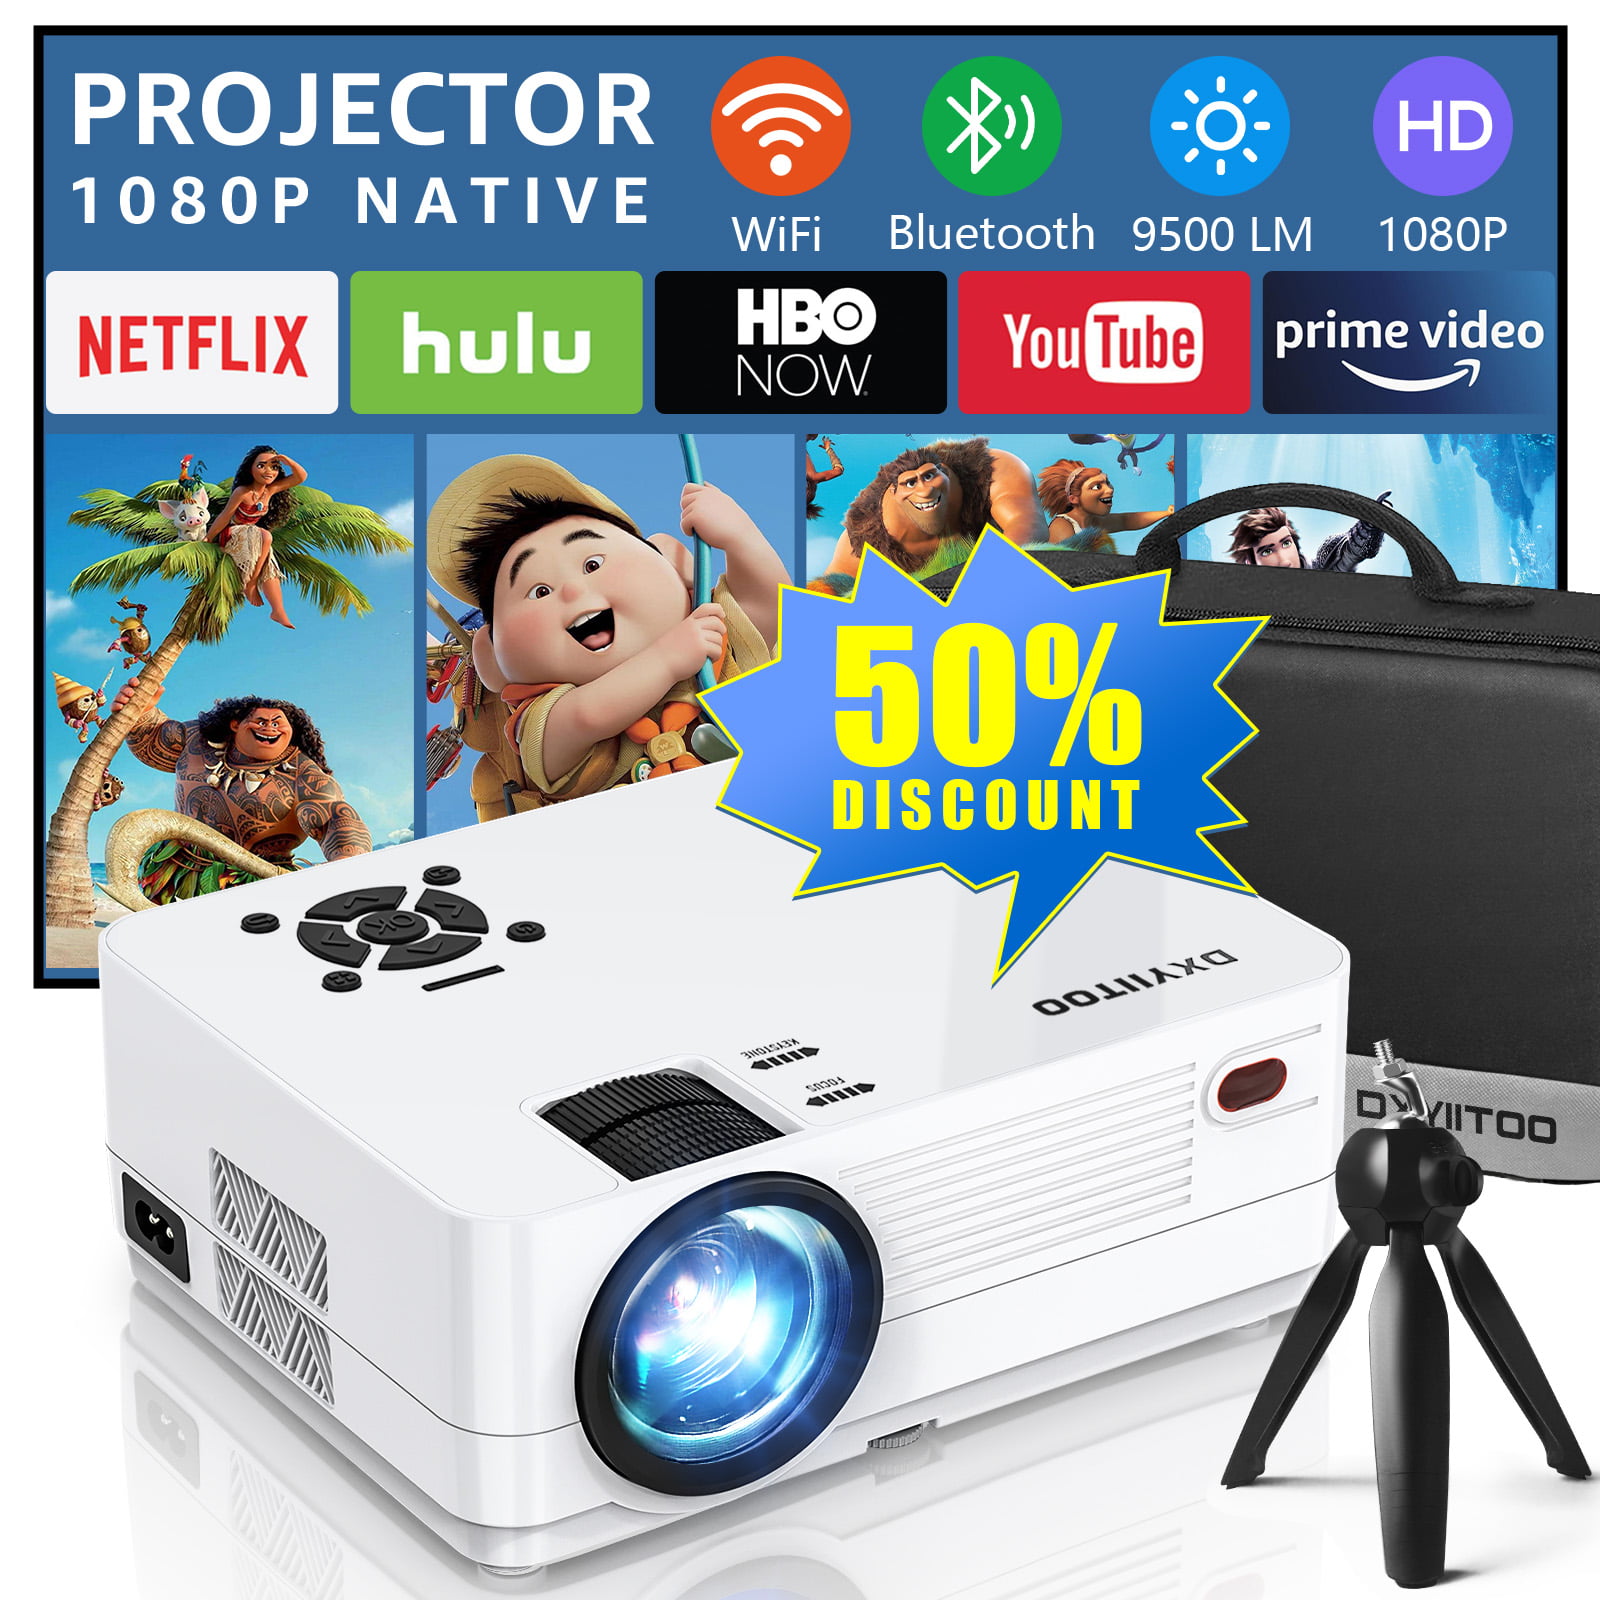 Dxyiitoo Native 1080P HD Projector with WiFi and Bluetooth, Movie Projector  for Outdoor Movies, LCD Technology 300